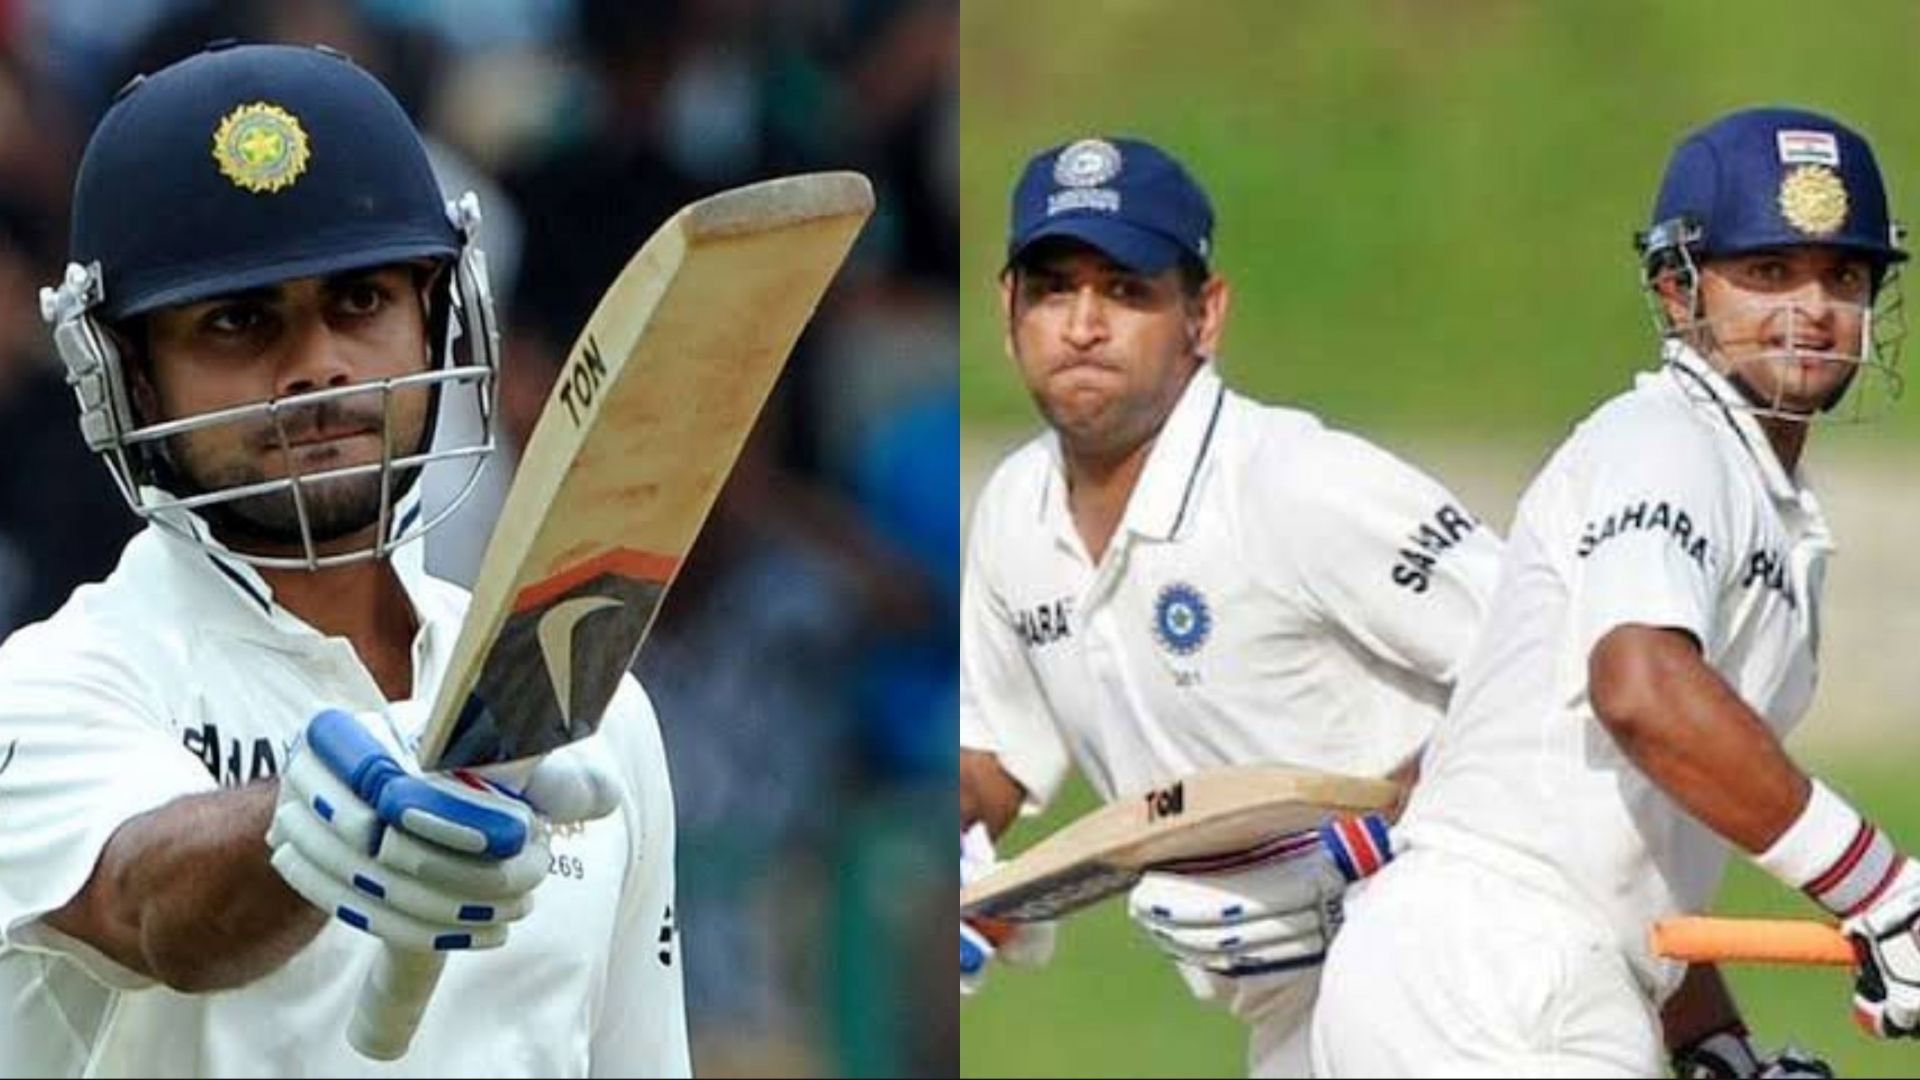 Virat Kohli (L) made his Test debut in 2011; MS Dhoni and Suresh Raina were also a part of the playing XI then